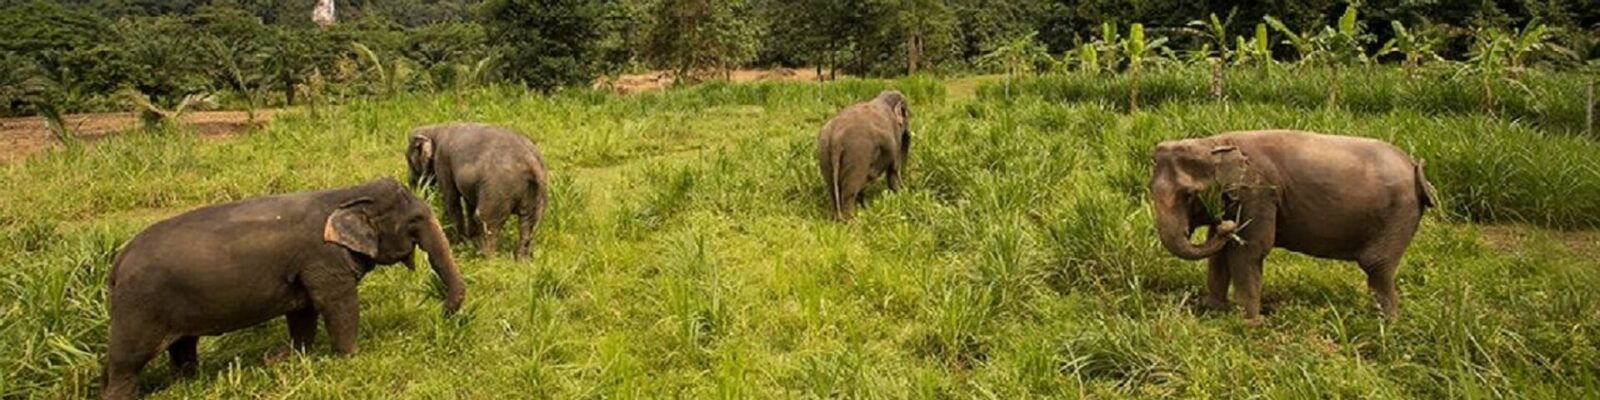 Finding an Ethical Elephant Experience in Thailand